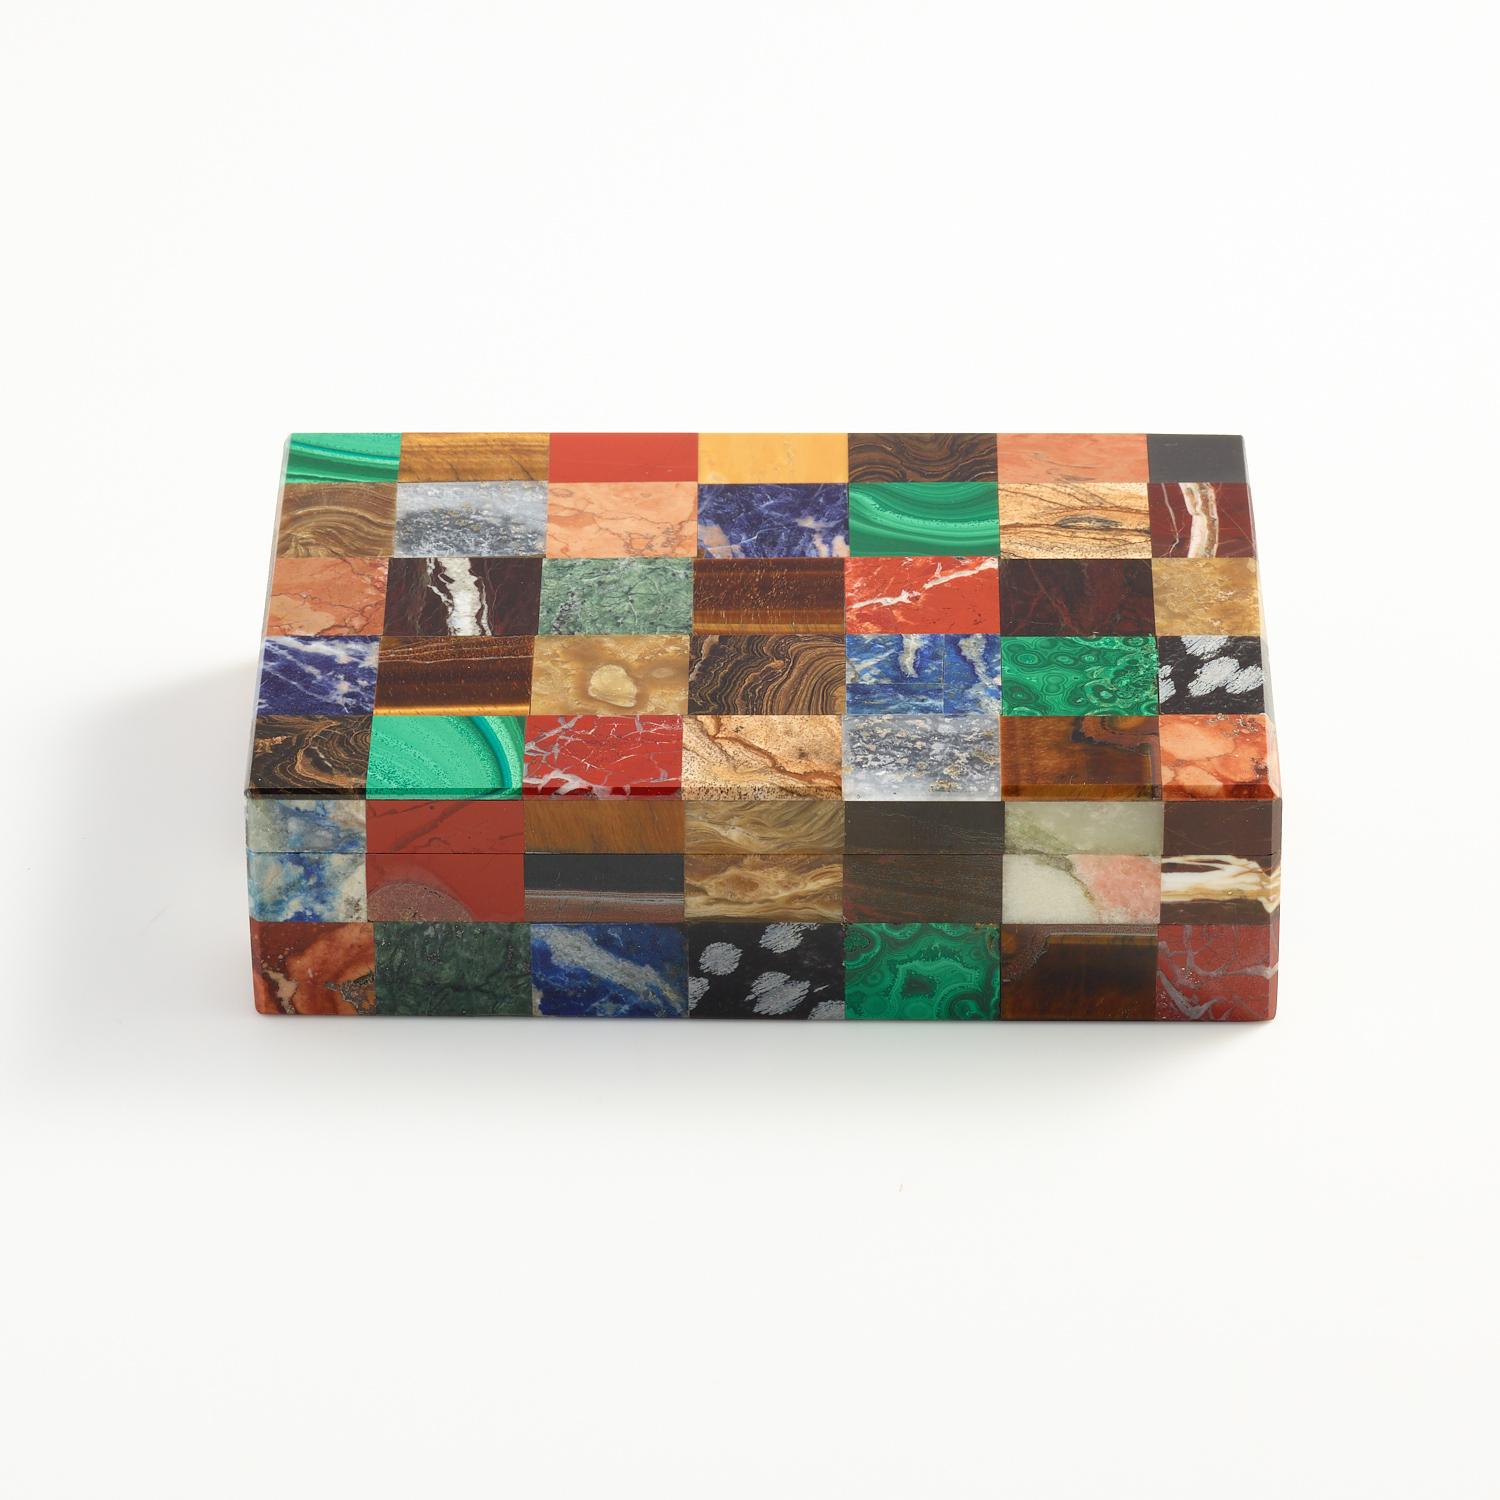 A colorful patchwork stone specimen box, Italian, circa 1930.

Excellent quality both on the exterior and interior which is lined with black onyx and as can be seen the exterior stones samples are beautifully matched. 

This stunning box will